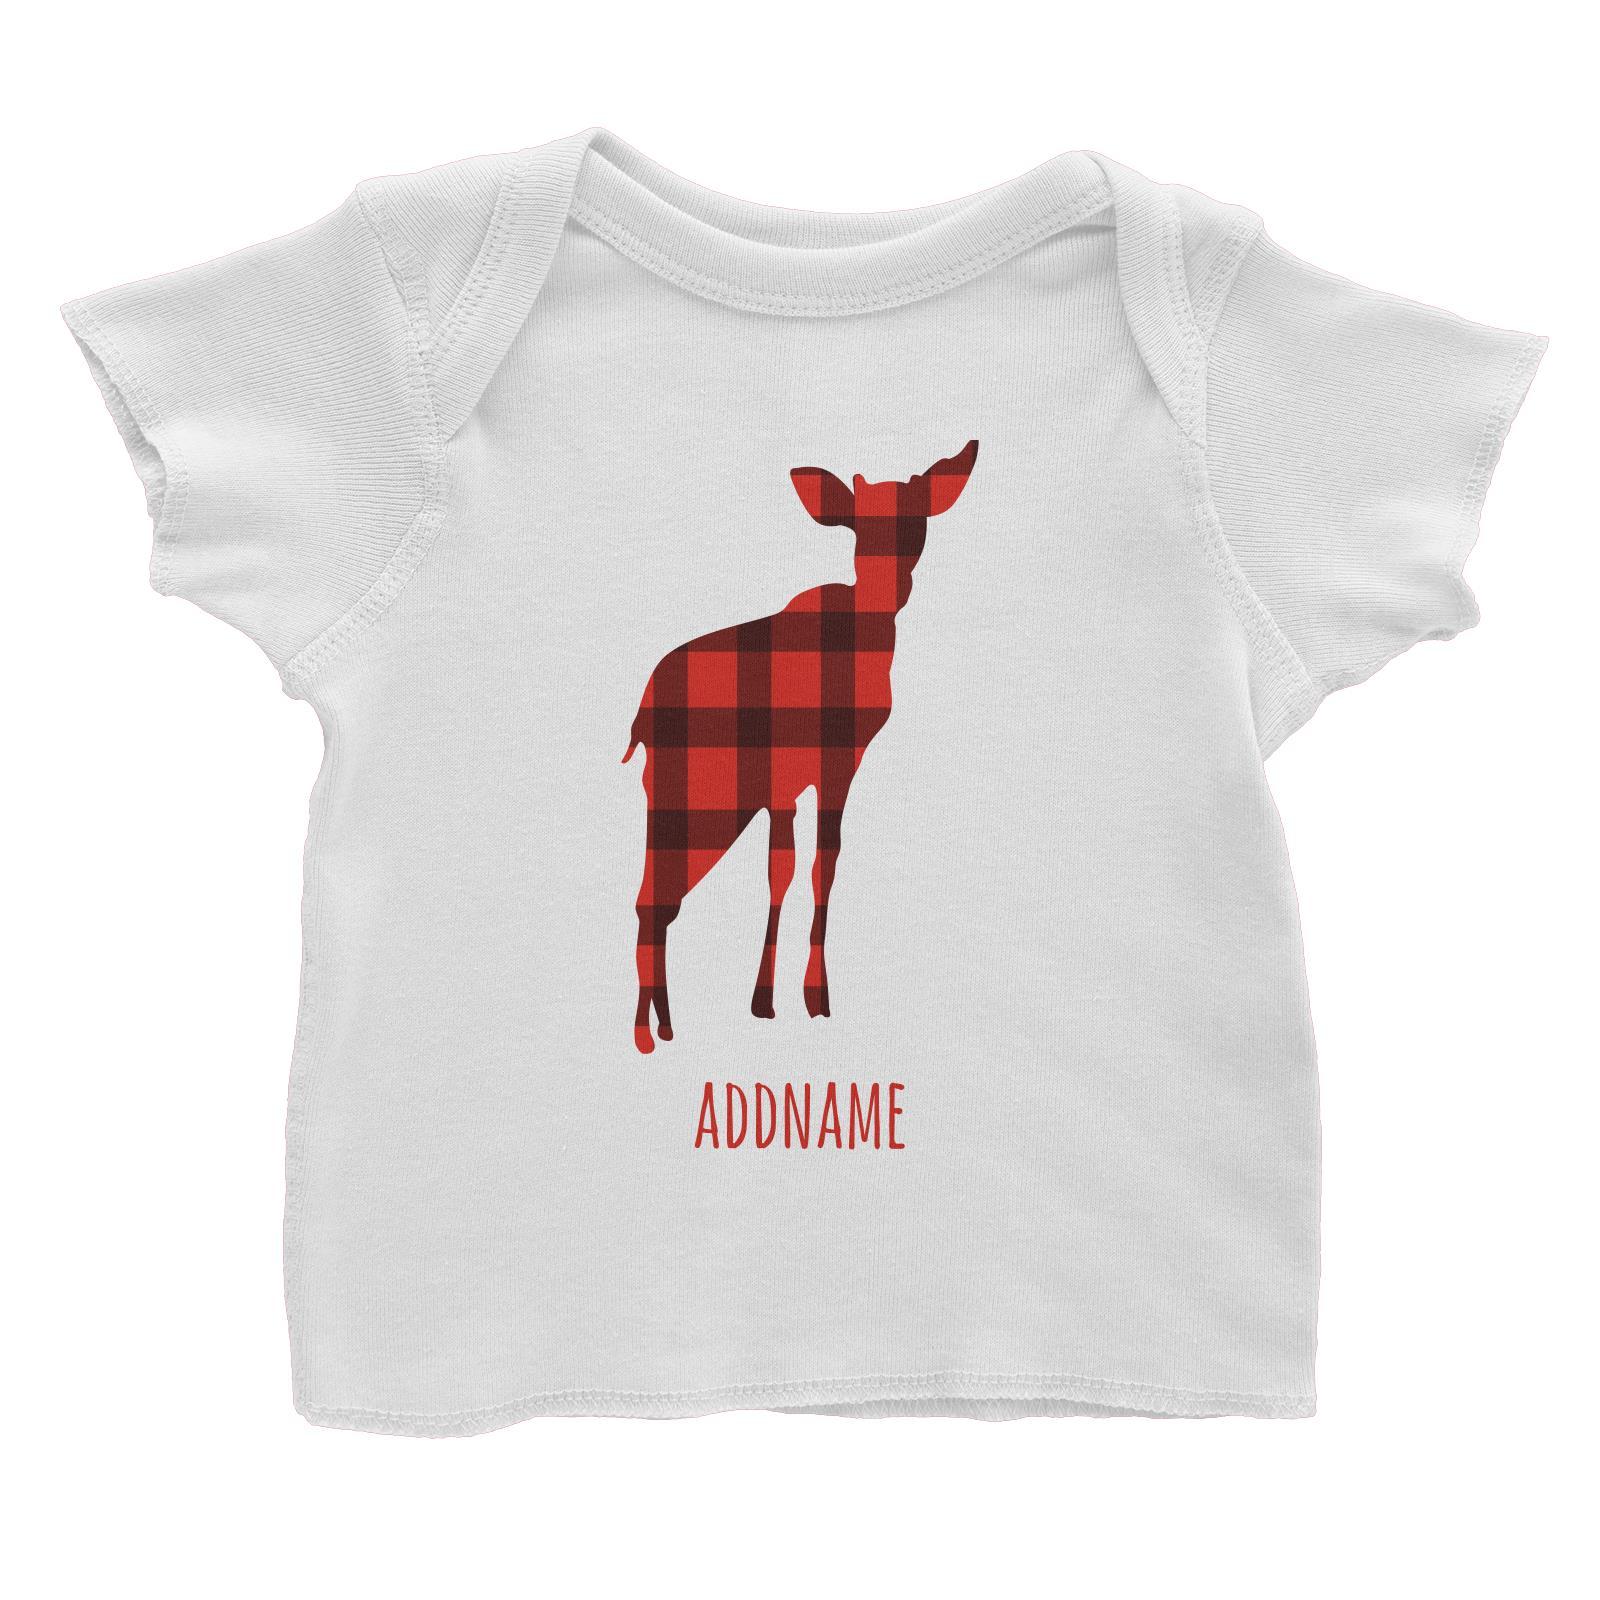 Baby Deer Silhouette Checkered Pattern Addname Baby T-Shirt Christmas Matching Family Animal Personalizable Designs